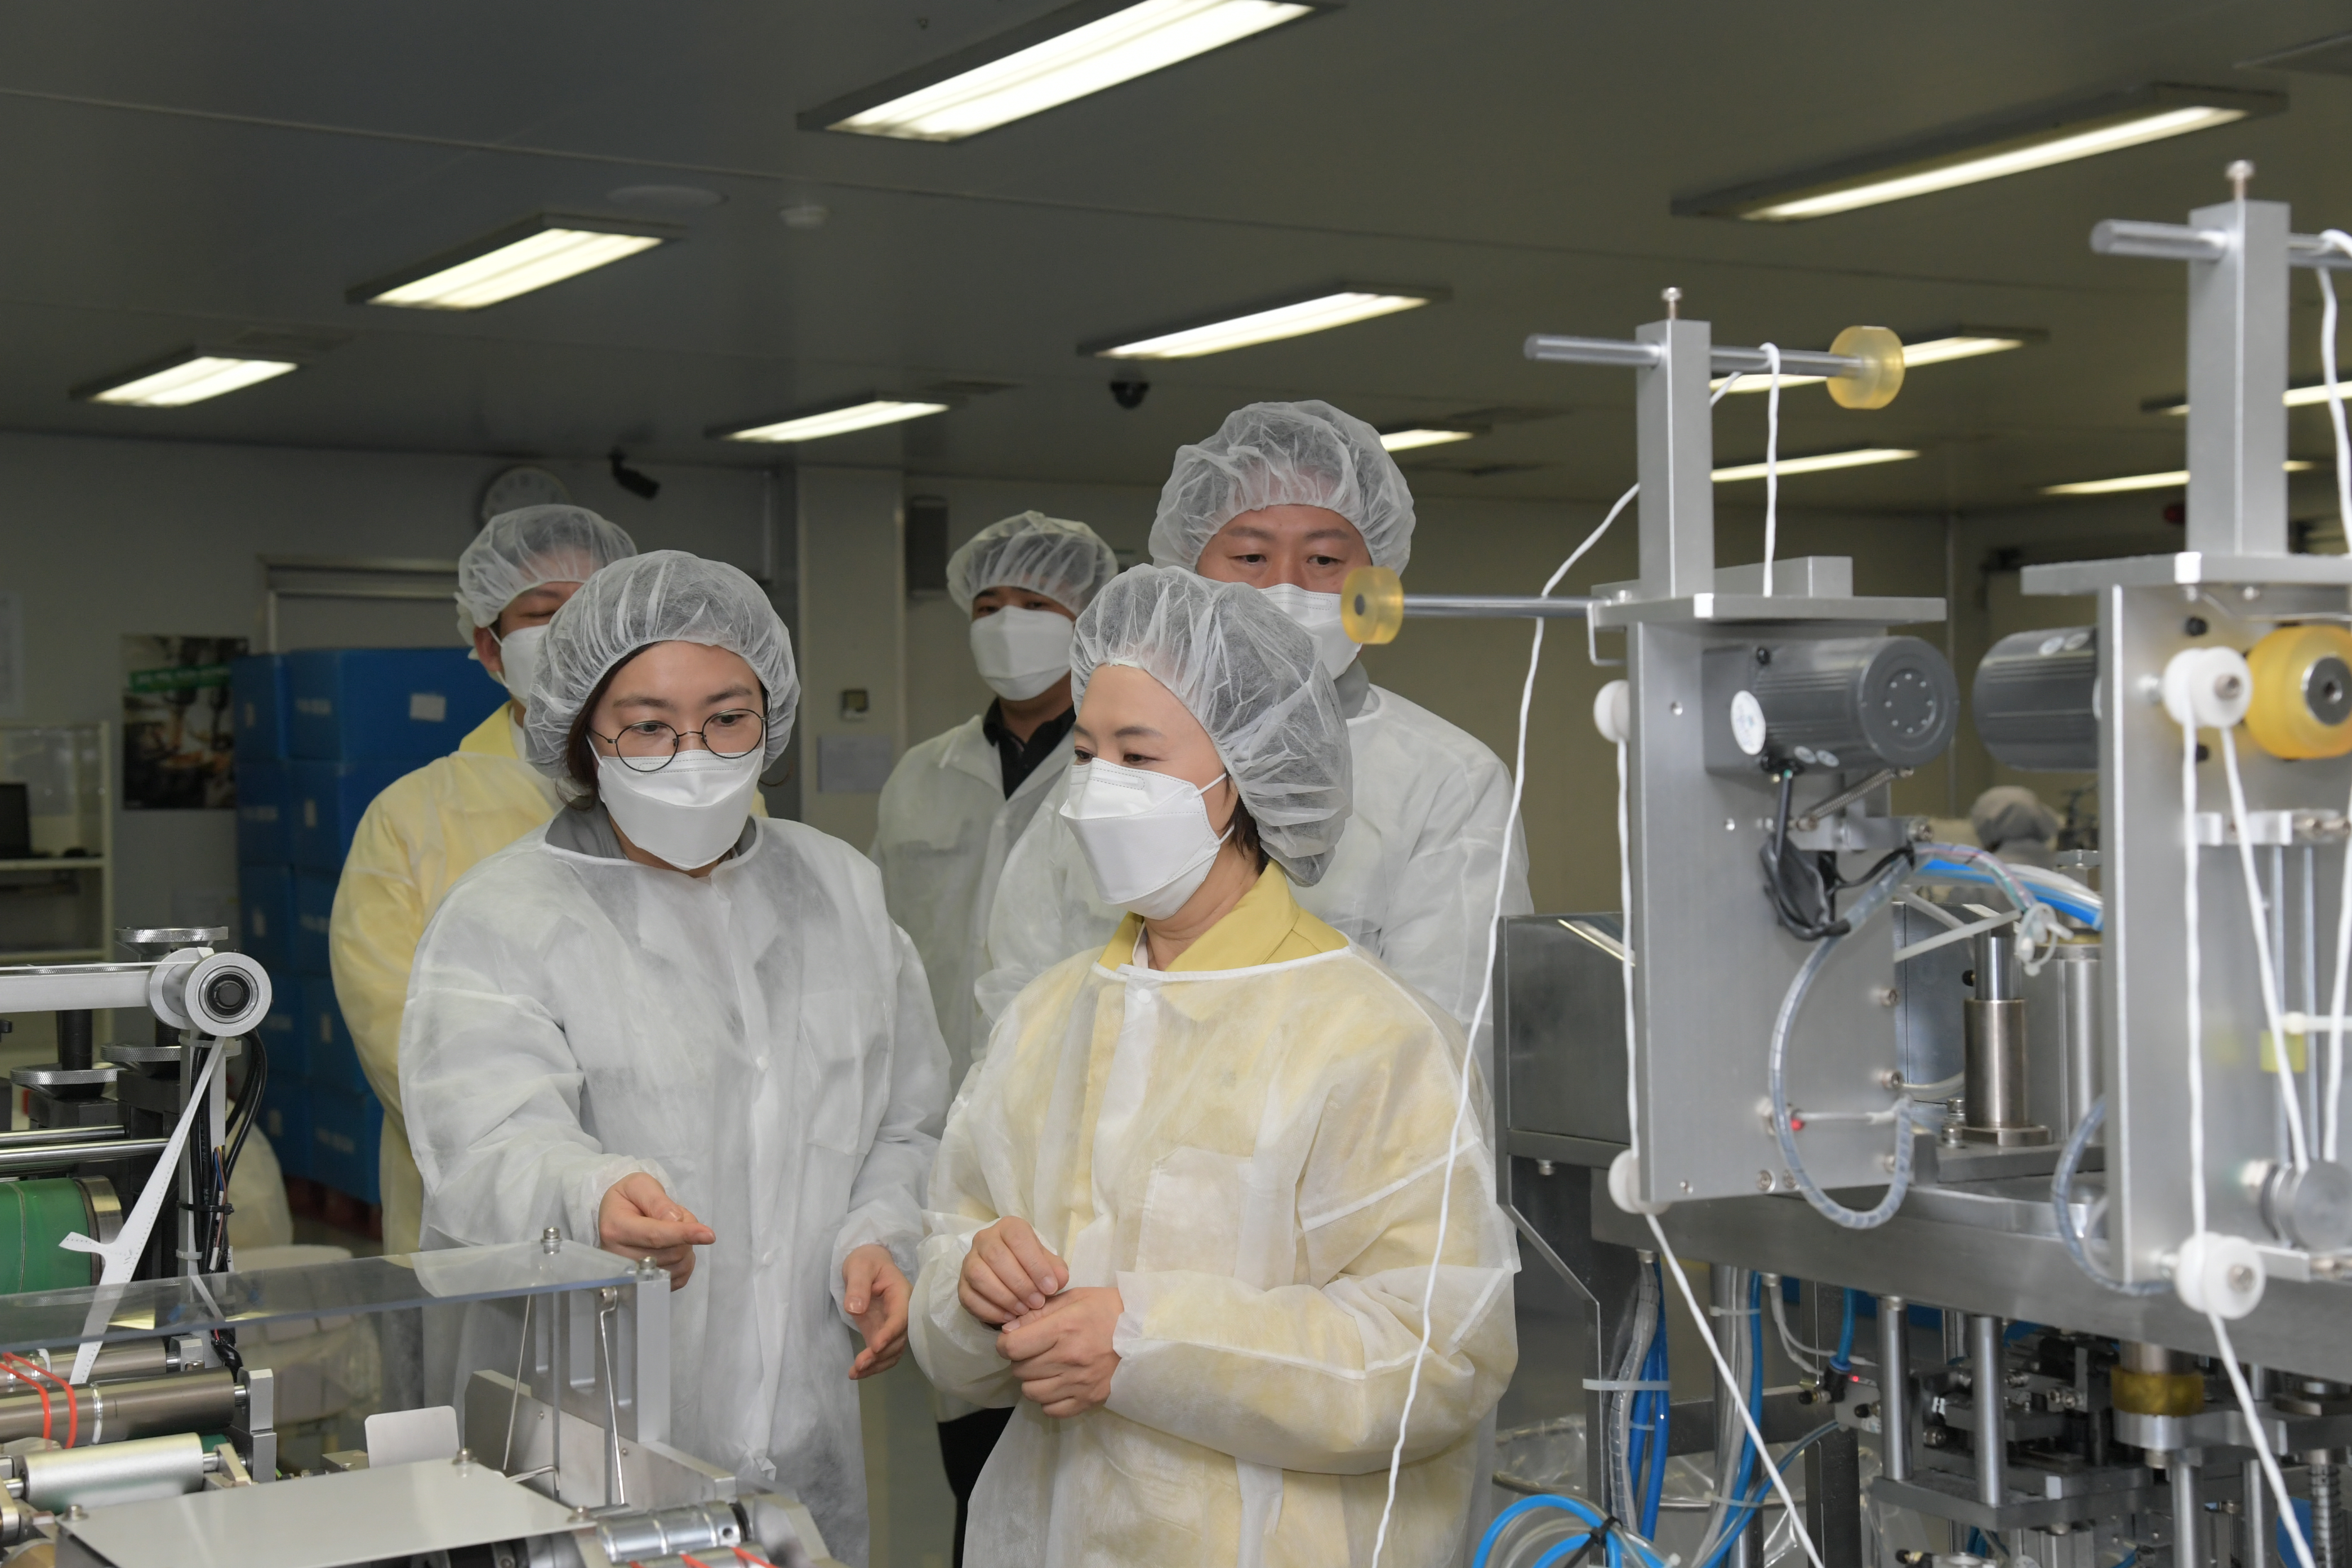 Photo News3 - [Mar. 16, 2020] Minister conducts inspection of filtering respirator manufacturing site